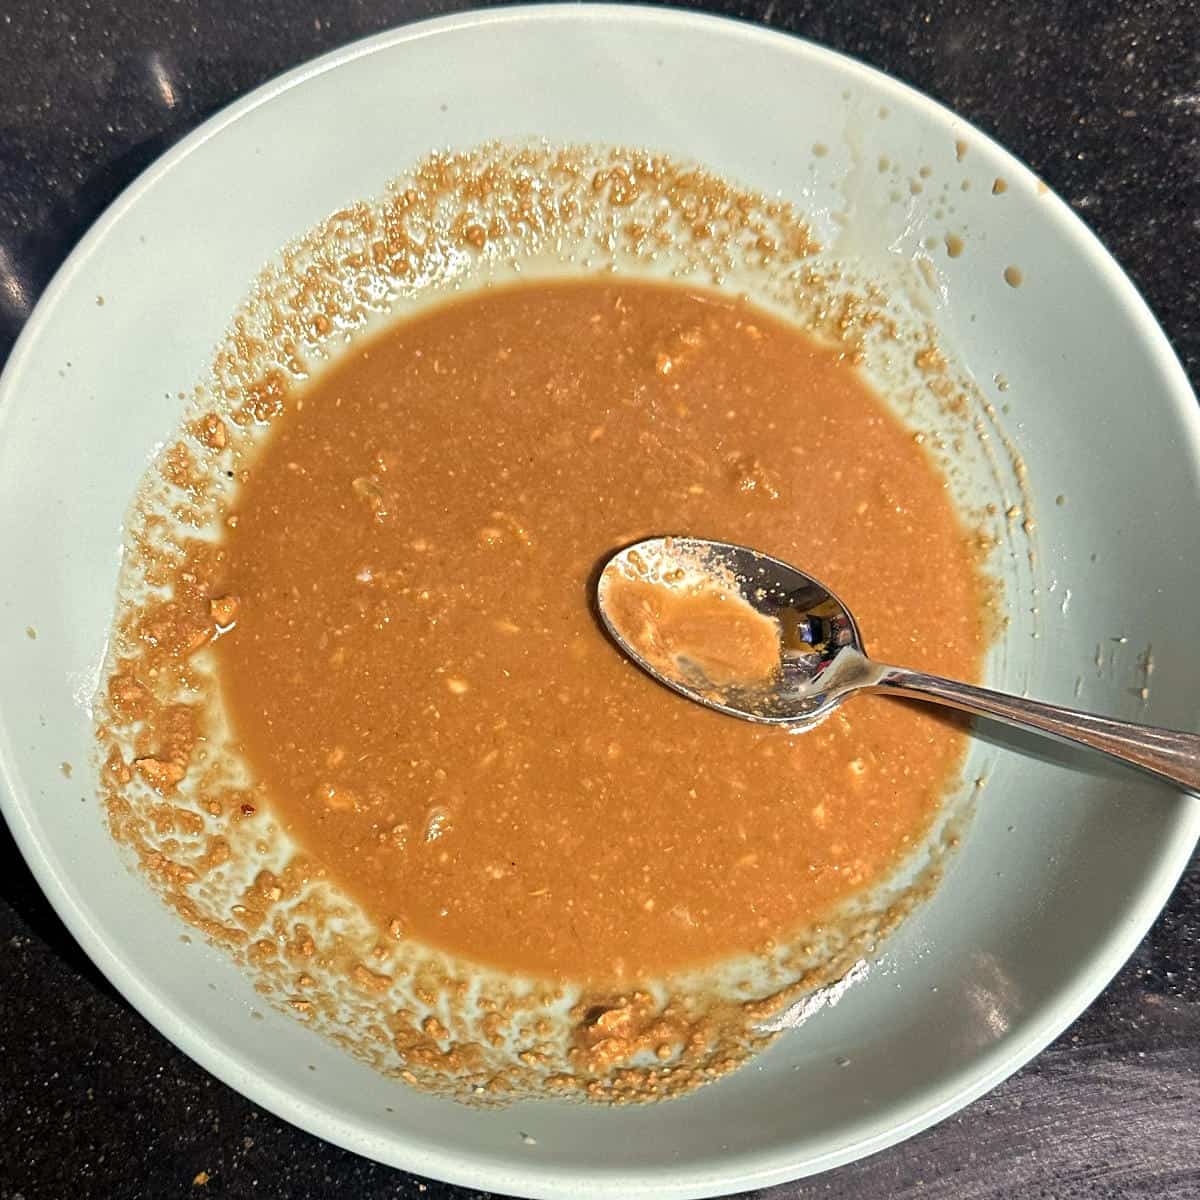 Marinade for chilli tofu in bowl.